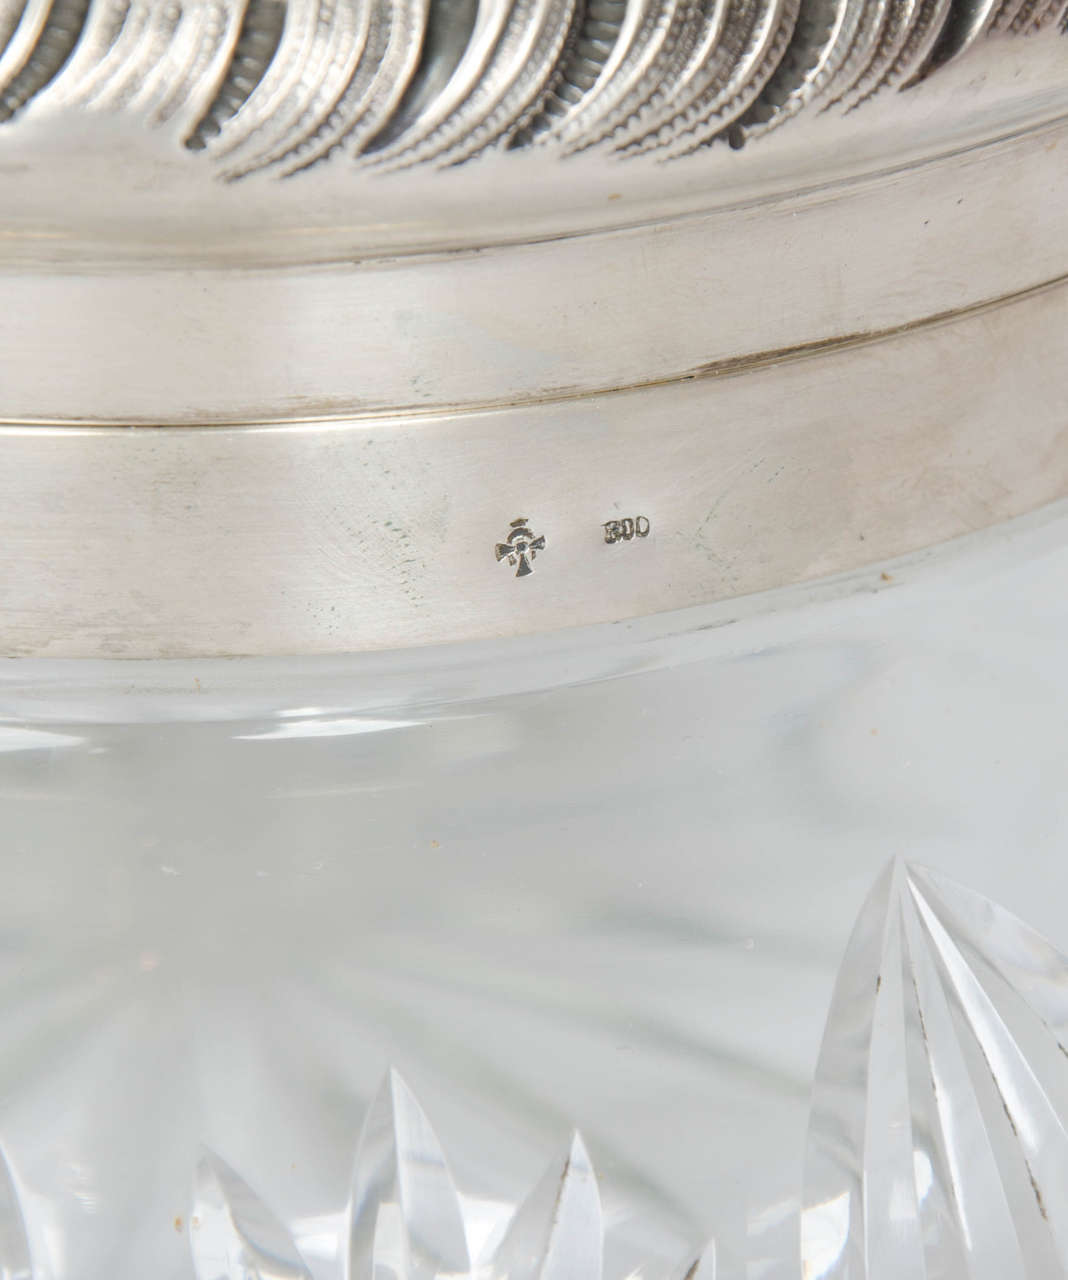 Extra large decorative cut-glass bowl with silver top.